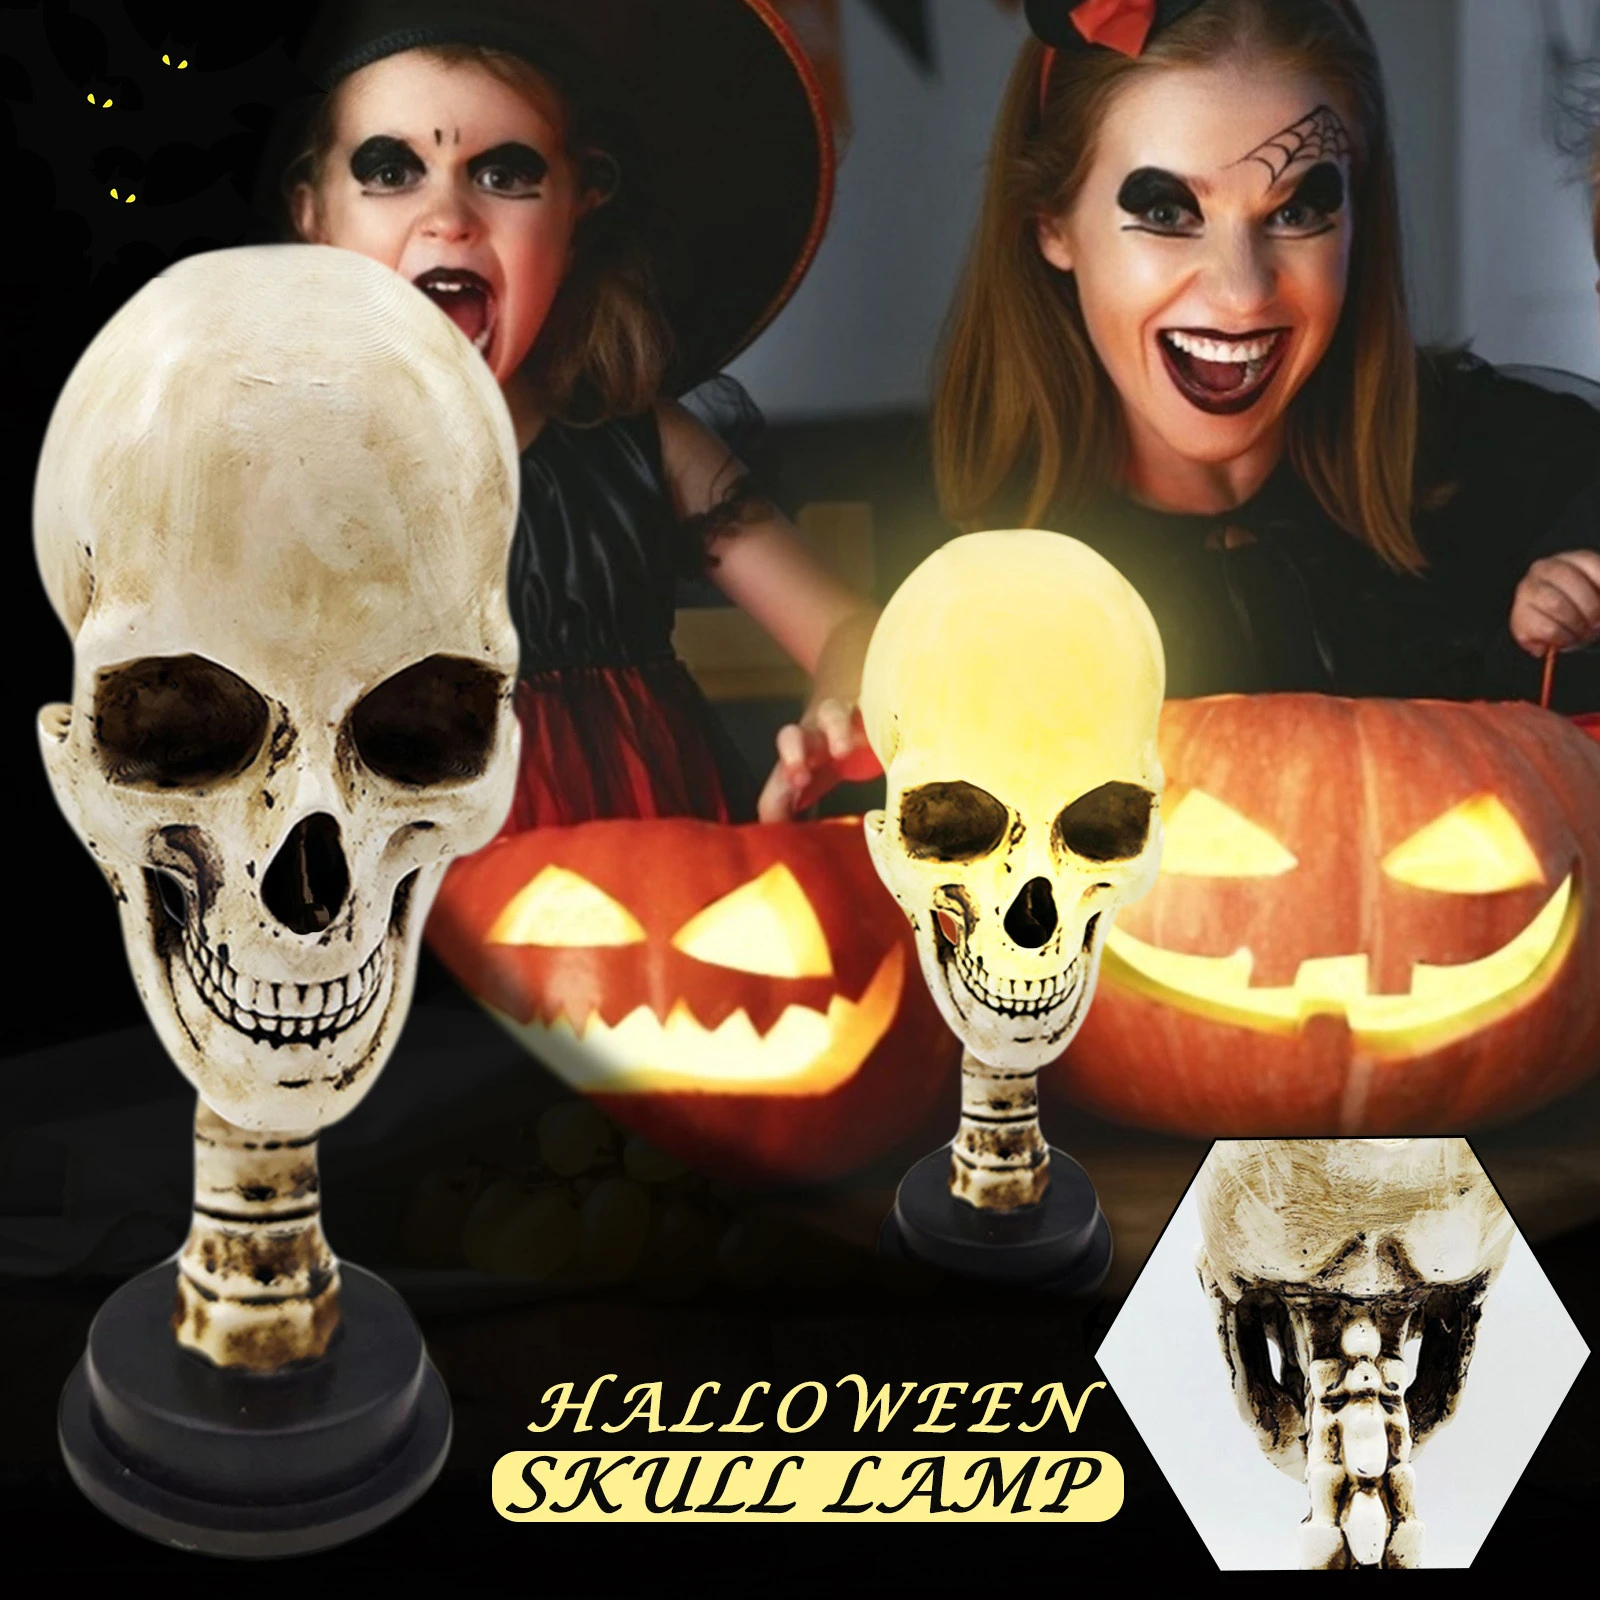 Ace Select LED Skull Light for Halloween Bar Table Decorations-Cool Birthday Surprise-Decorative Night Light Skull Ornament with LED Light Up Eyes Desk Lamp for Gothic Party Decoration 